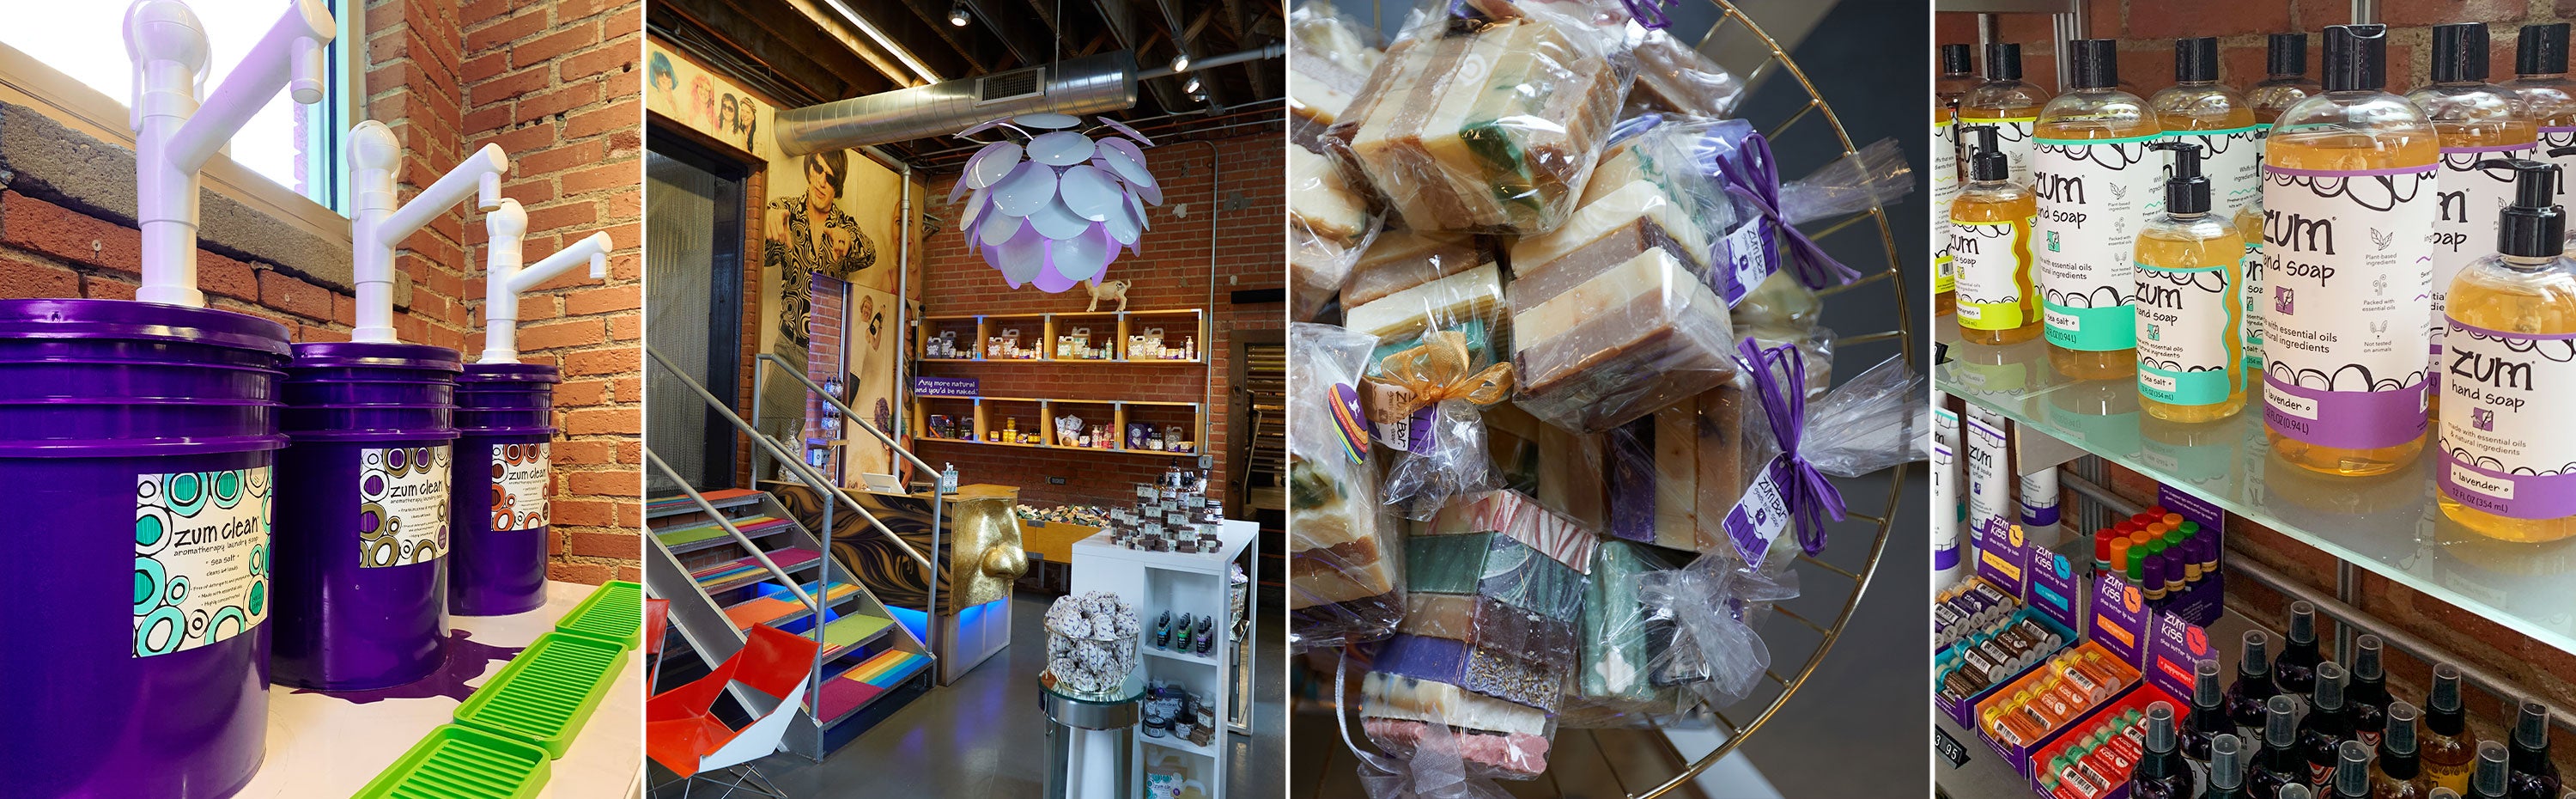 4 Squares with images in them. First square is a picture of Sea Salt, Frankincense & Myrrh, Patchouli Zum Laundry Soap filled purple barrels with white pumps. Second image of the inside of the Zum Factory Store - a colorful environment, with rows of shelves with Zum products. Third picture is an aerial shot of different Zum Bar Soap pound bags on a basket. Fourth pictures is a close up shot of the shelves at the Factory store - filled with Zum Hand Soap 12 fl. oz. and refill, Zum Kiss Sticks, Zum Body Hand & Body Lotion and Zum Body Oil.